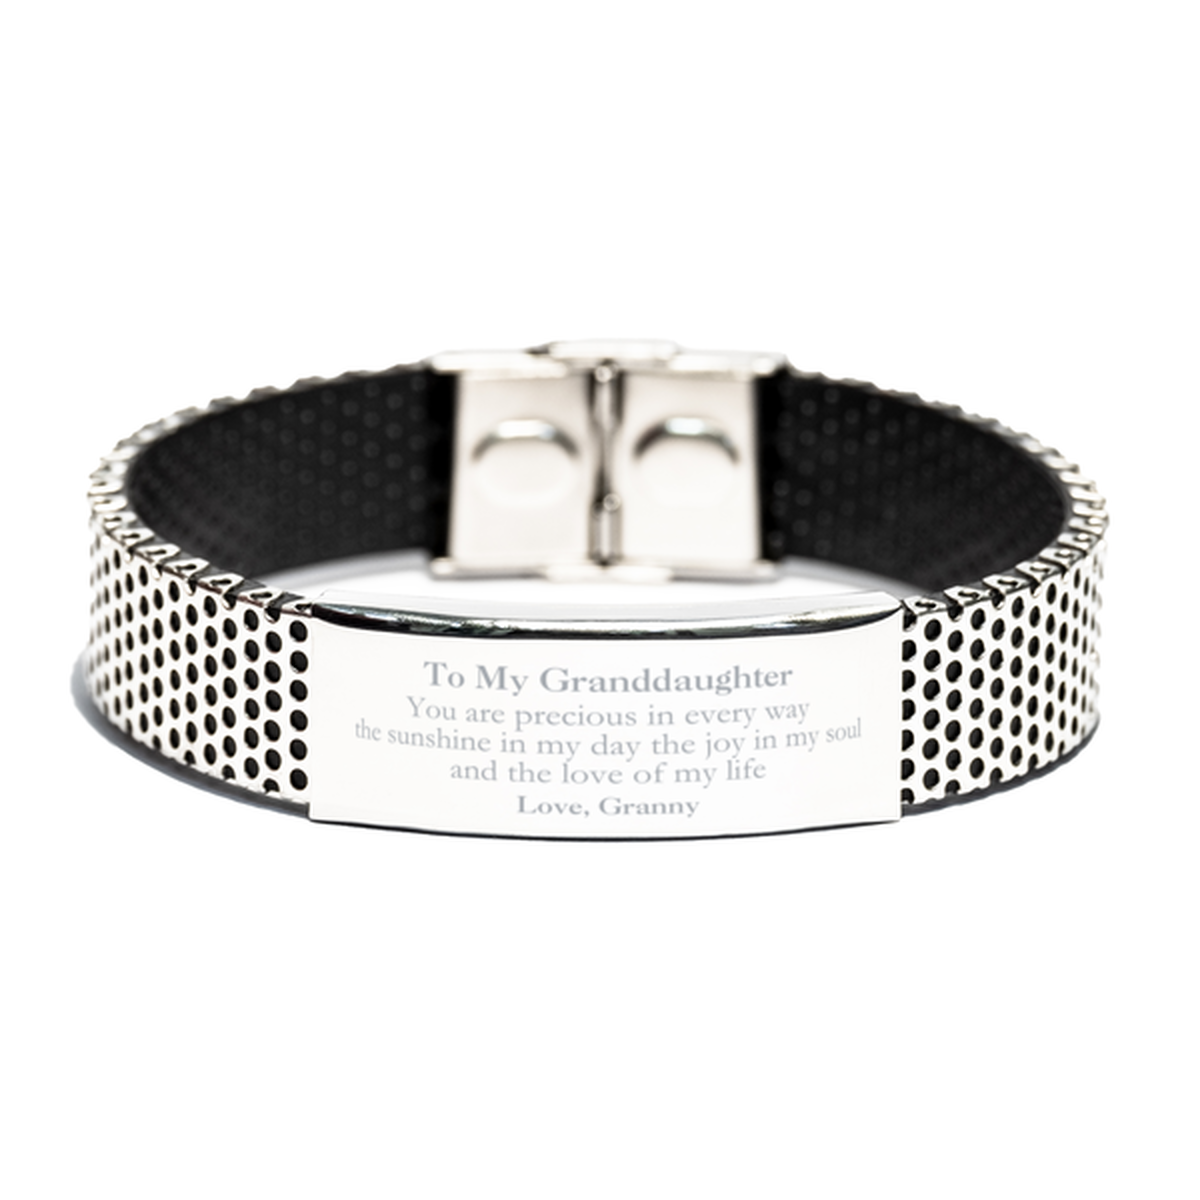 Graduation Gifts for Granddaughter Stainless Steel Bracelet Present from Granny, Christmas Granddaughter Birthday Gifts Granddaughter You are precious in every way the sunshine in my day. Love, Granny